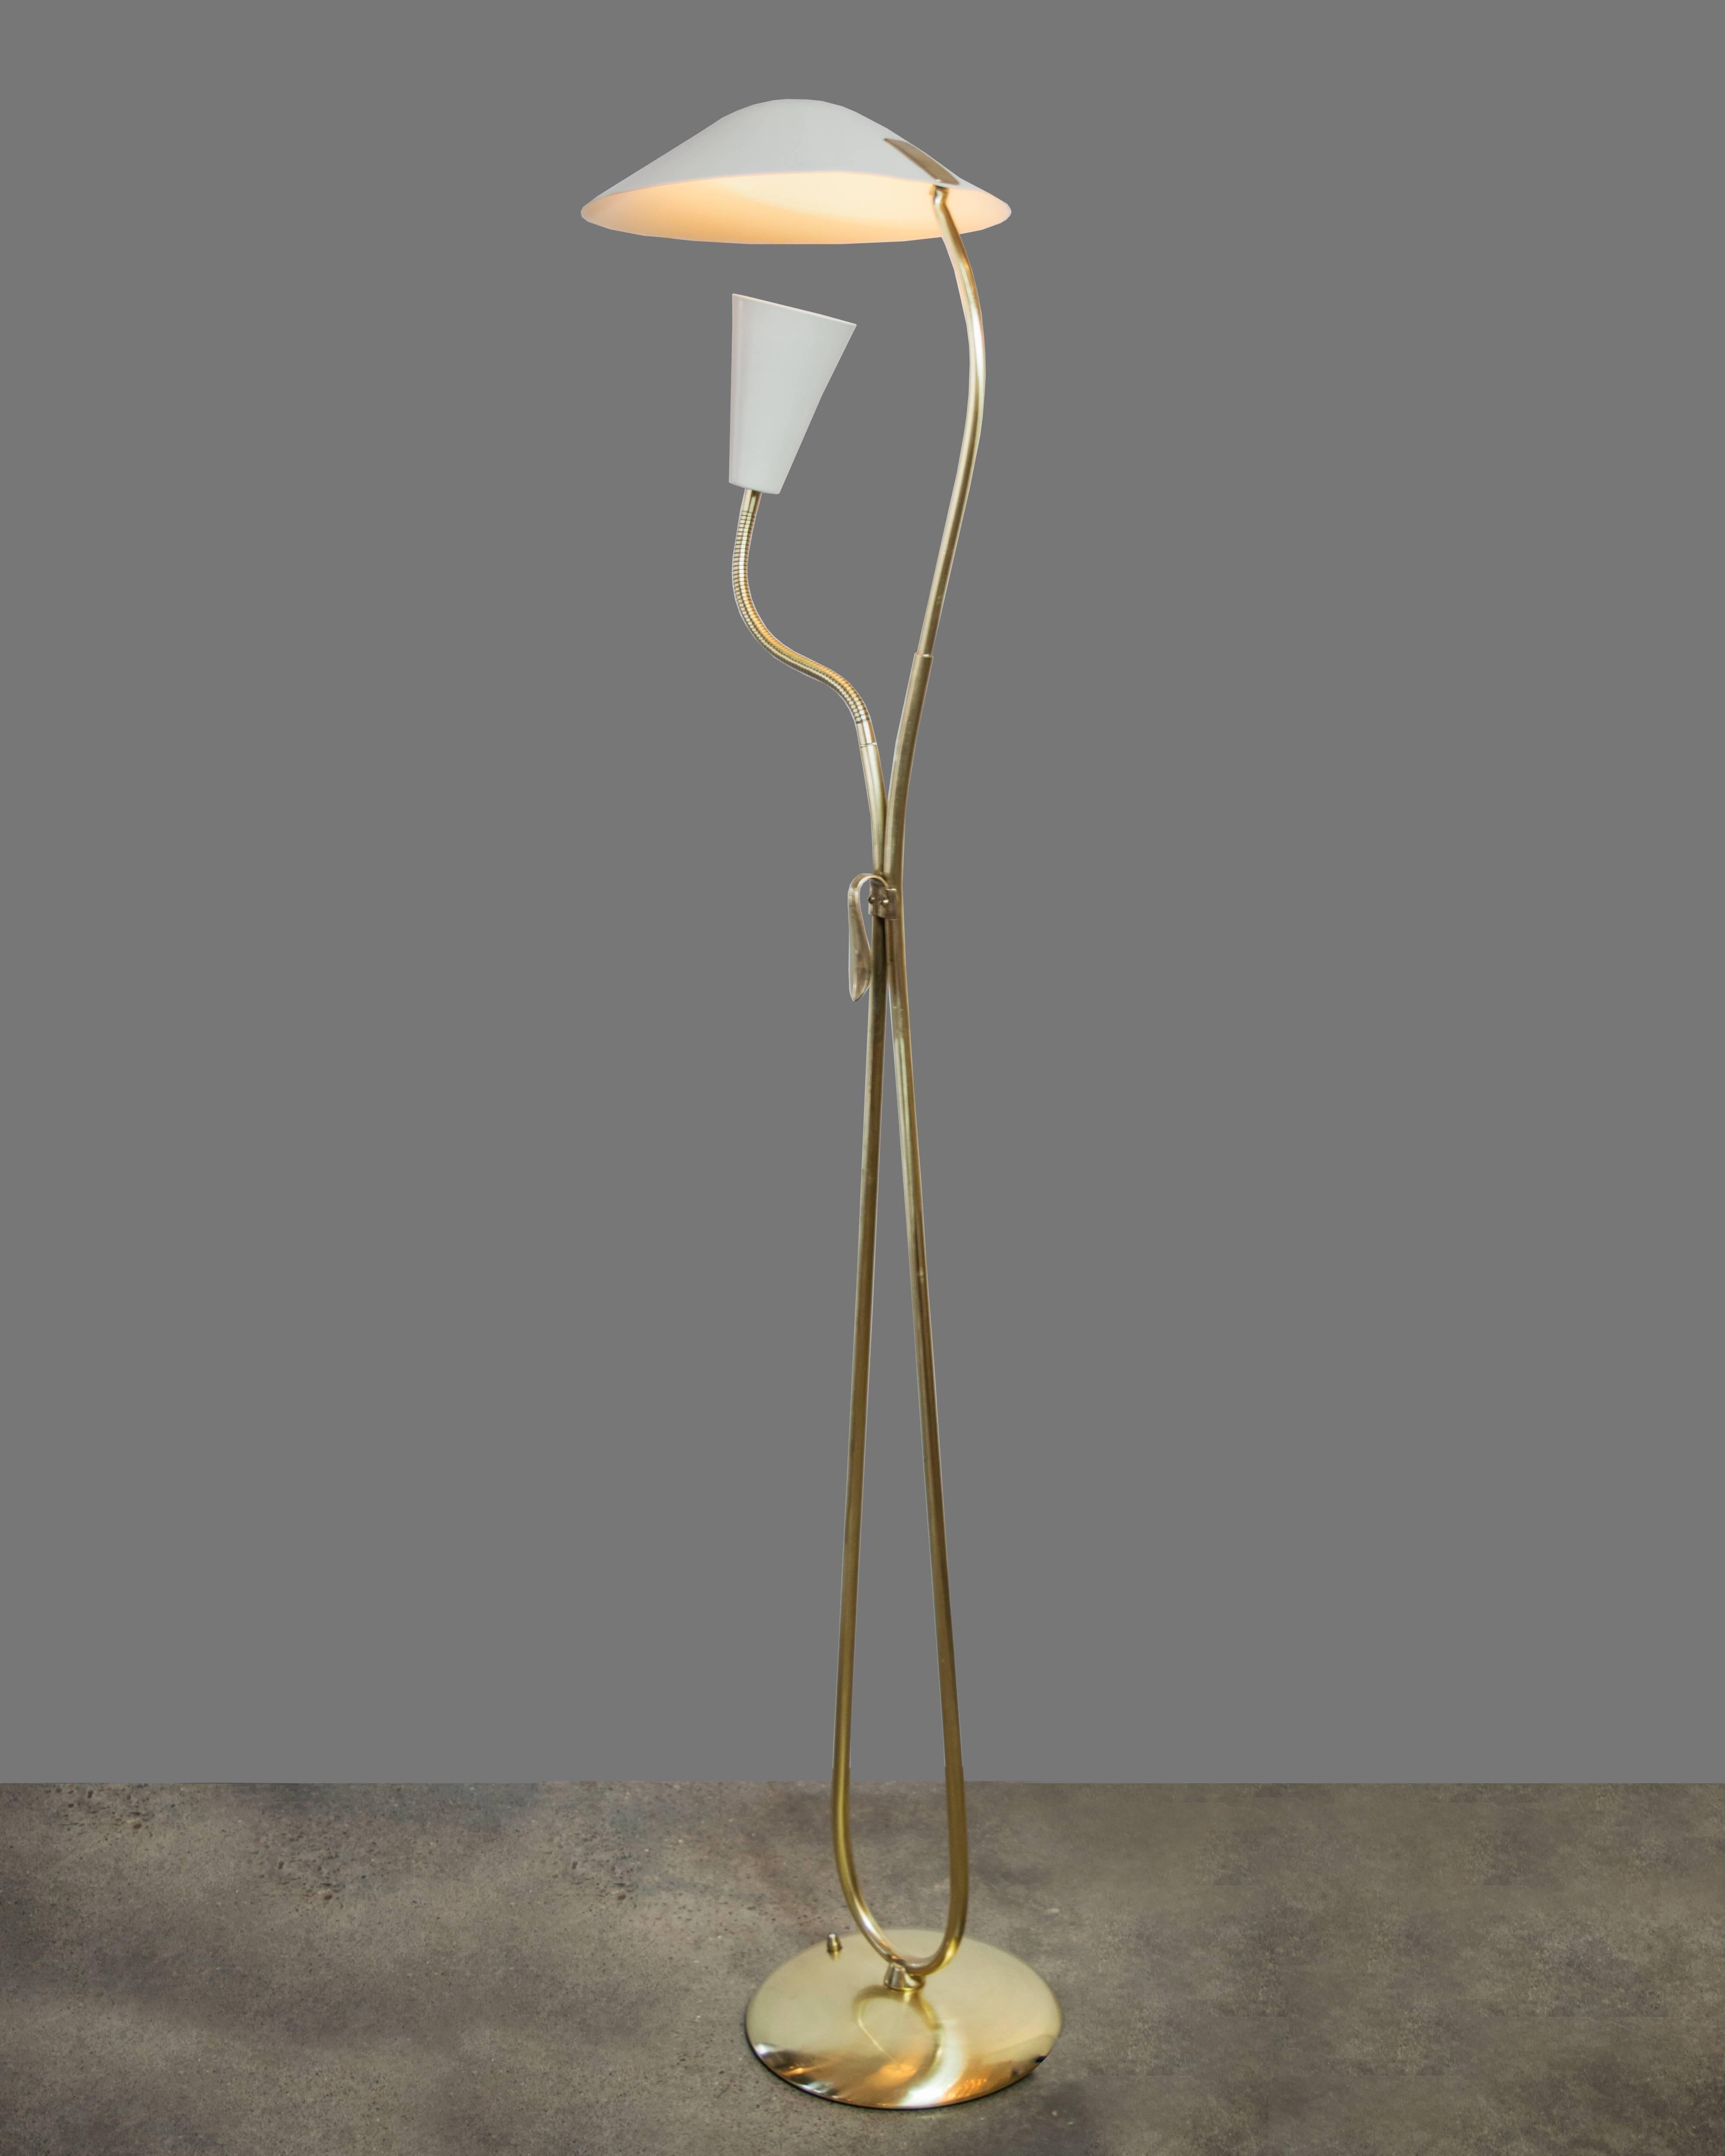 Graceful, sculptural brass floor lamp with a single light cone attached by an adjustable arm directed towards the UFO shaped shade. There is an attached handle in the middle of the lamp for easy adjustment. It comes with a floor switch and is in